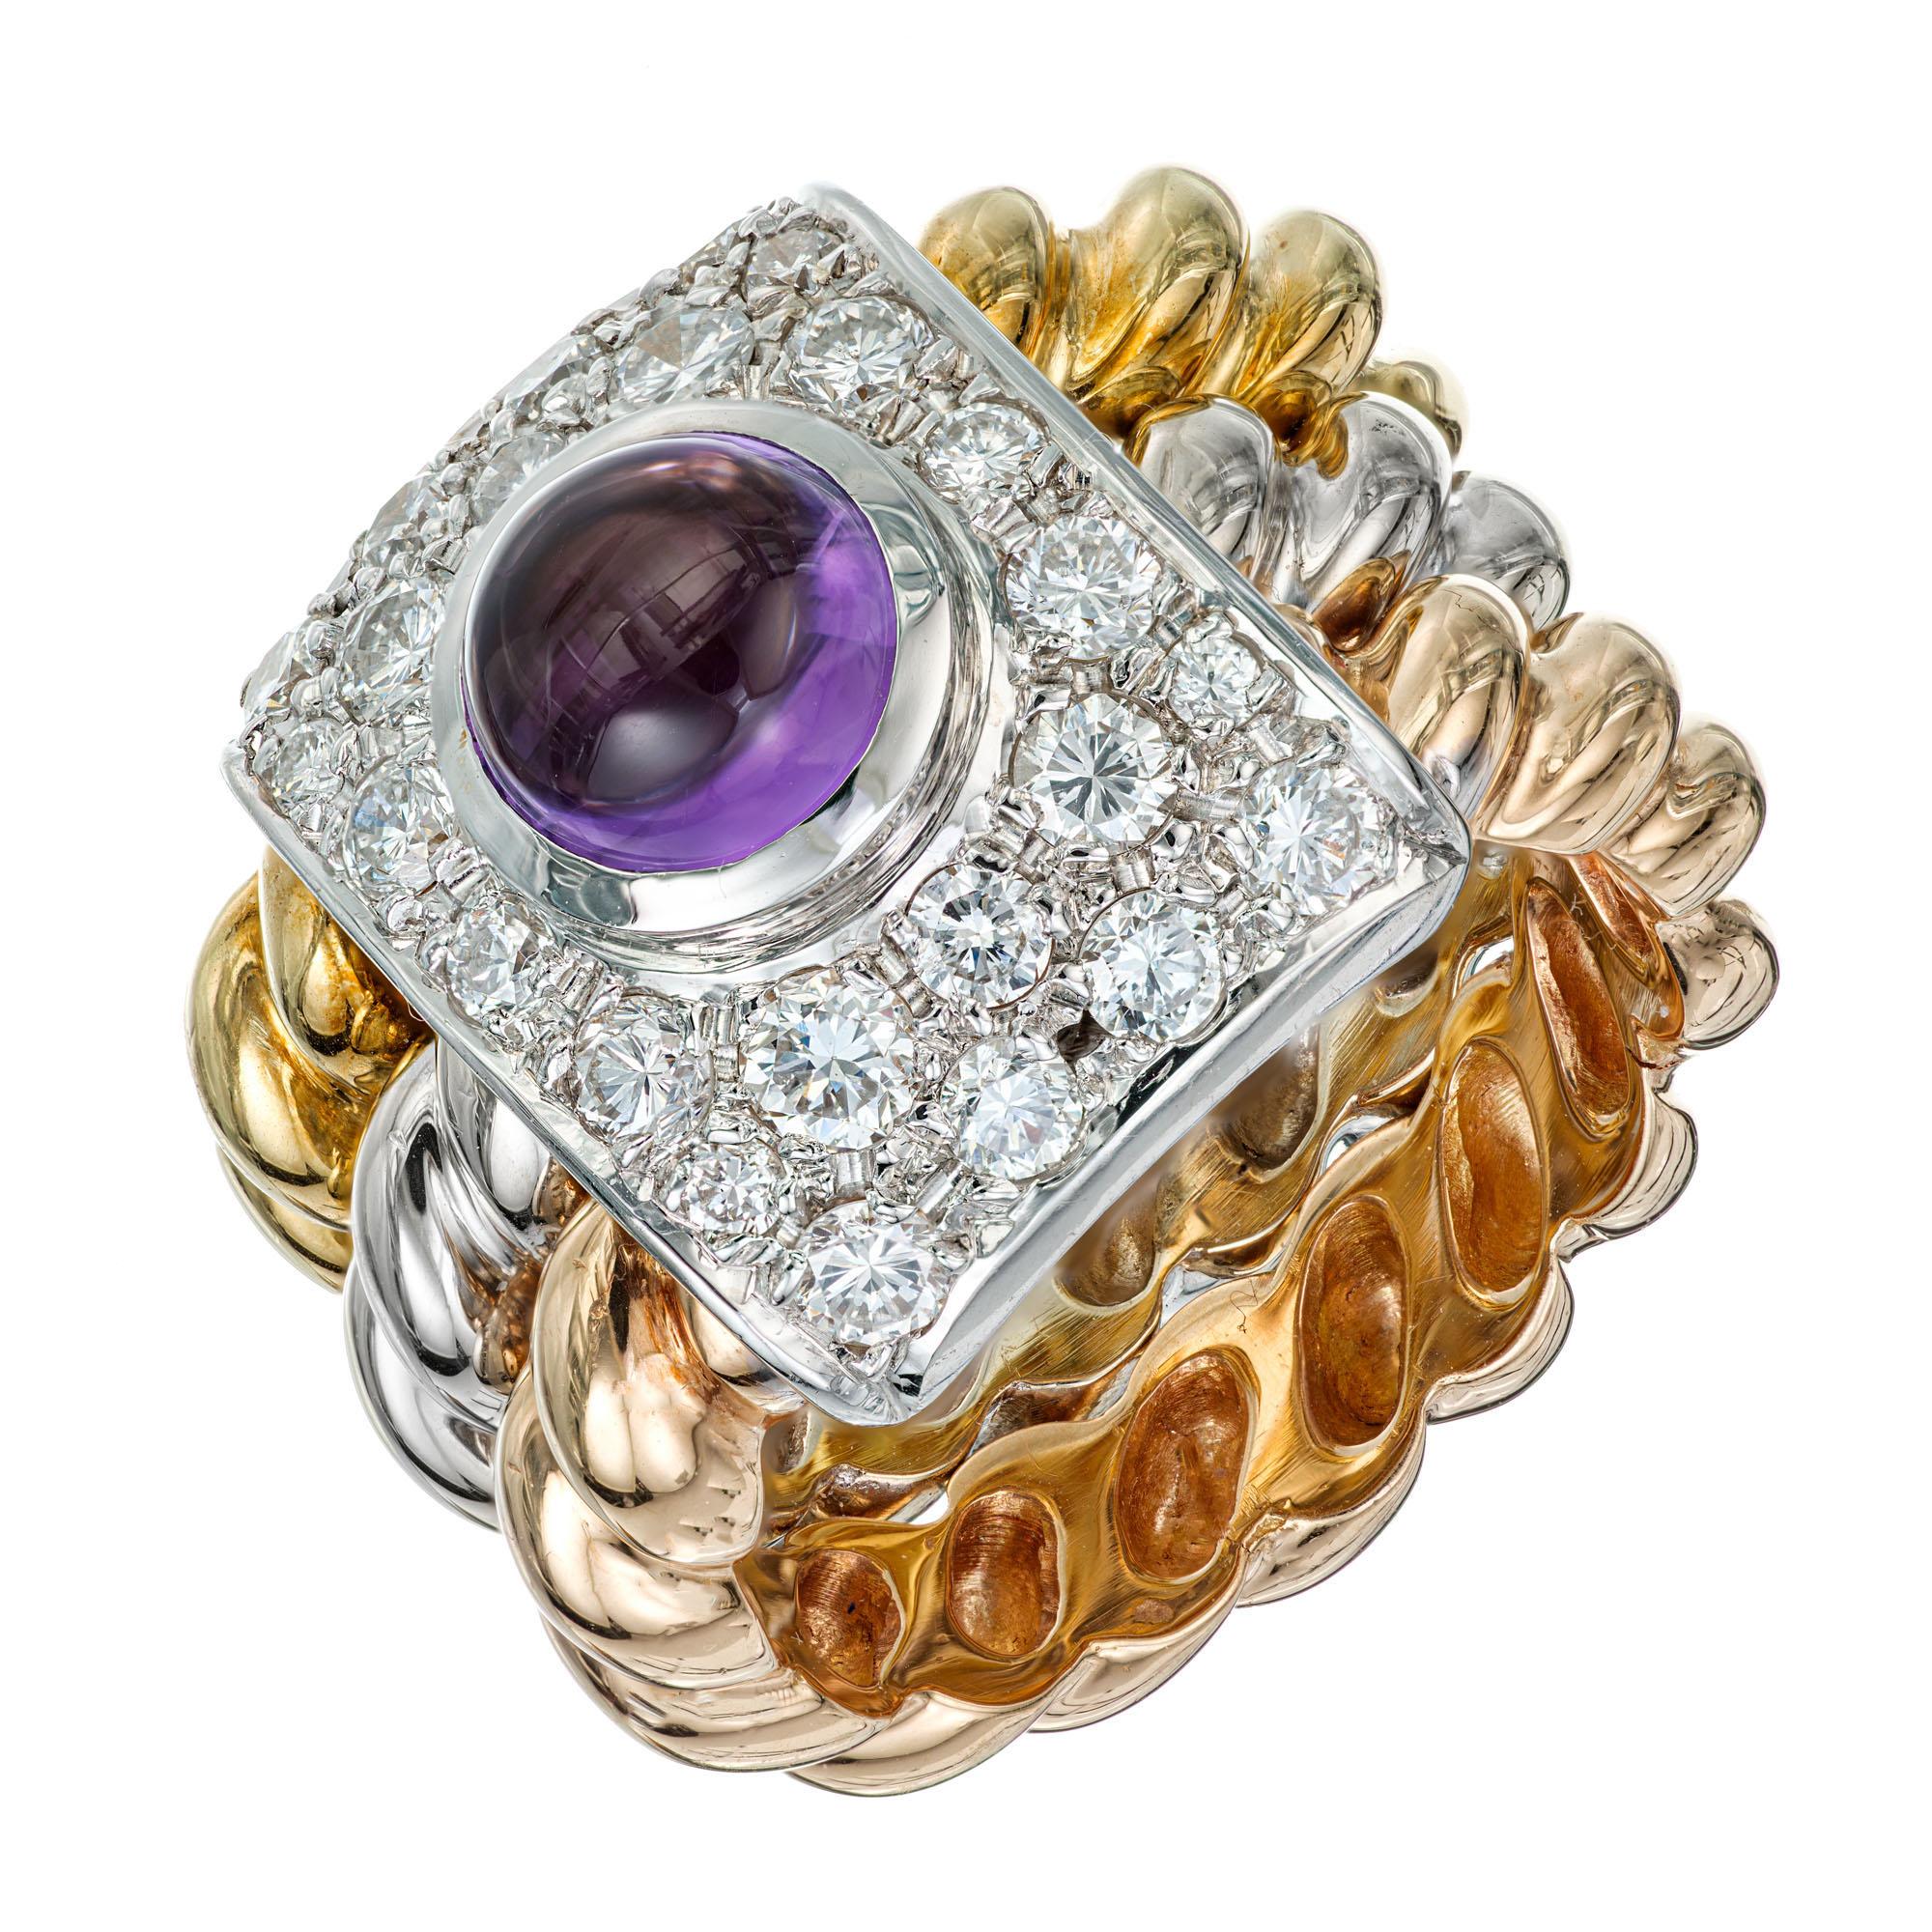 Amethyst and diamond tri-color ring. 1.00ct center cabochon amethyst with a square halo of 24 round diamonds. 18k Rose, white and yellow gold twist bands with a white gold diamond plate.

1 6mm genuine Amethyst cabochon, approx. total weight